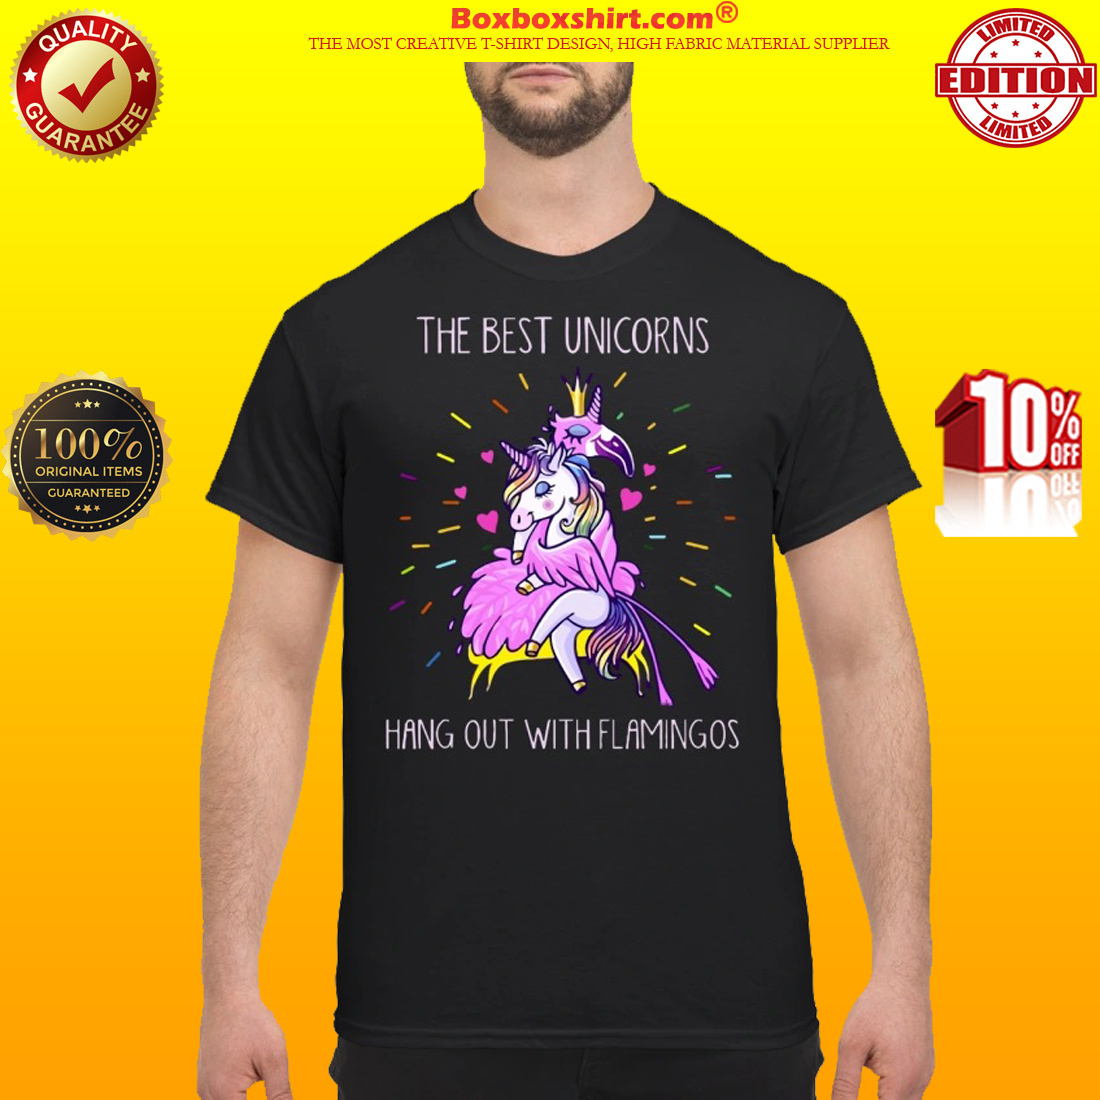 The best unicorns hang out with flamingos classic shirt